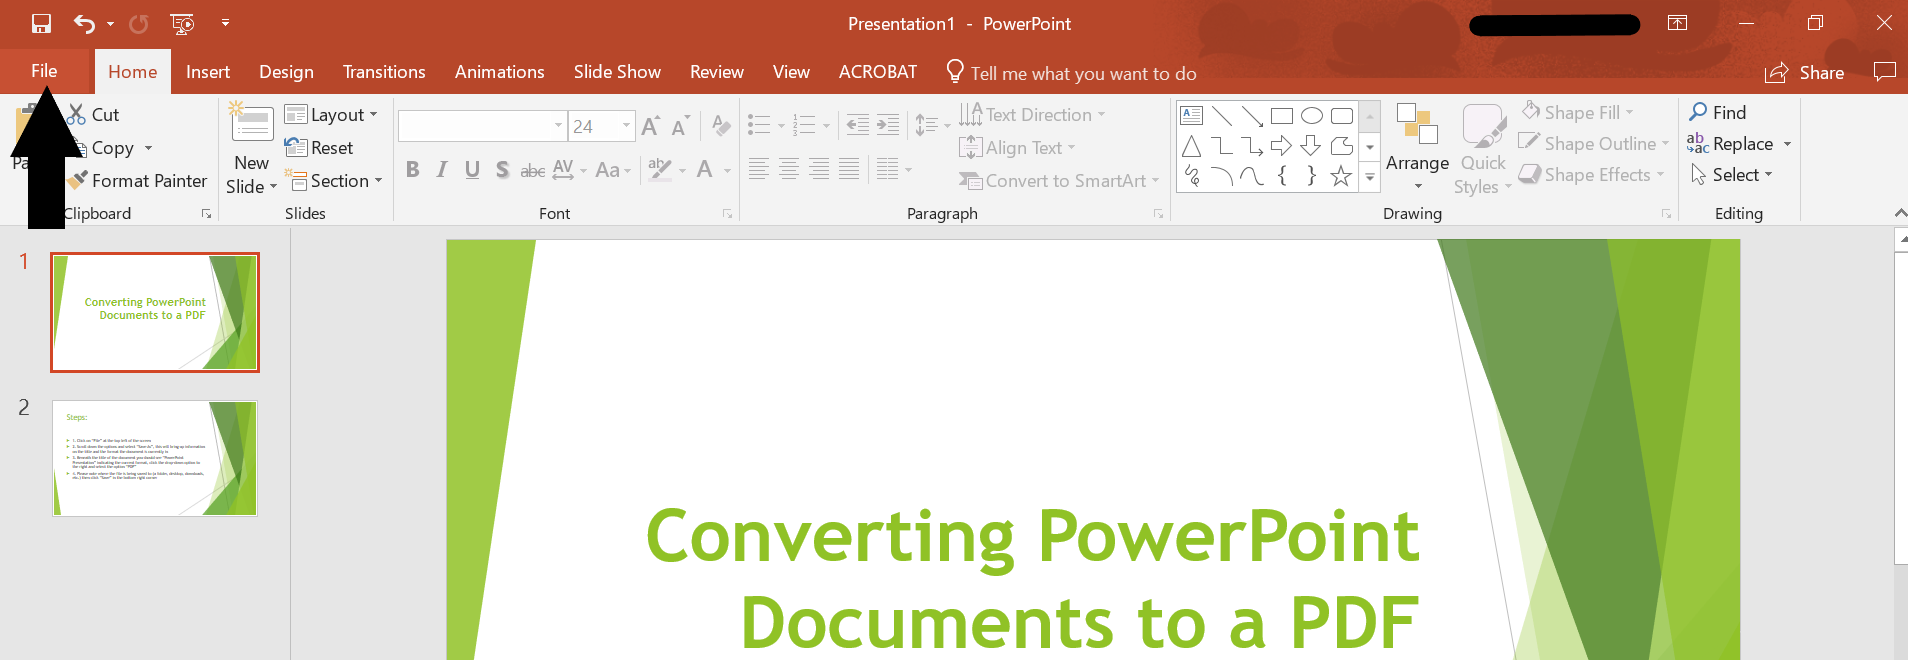 PowerPoint - File